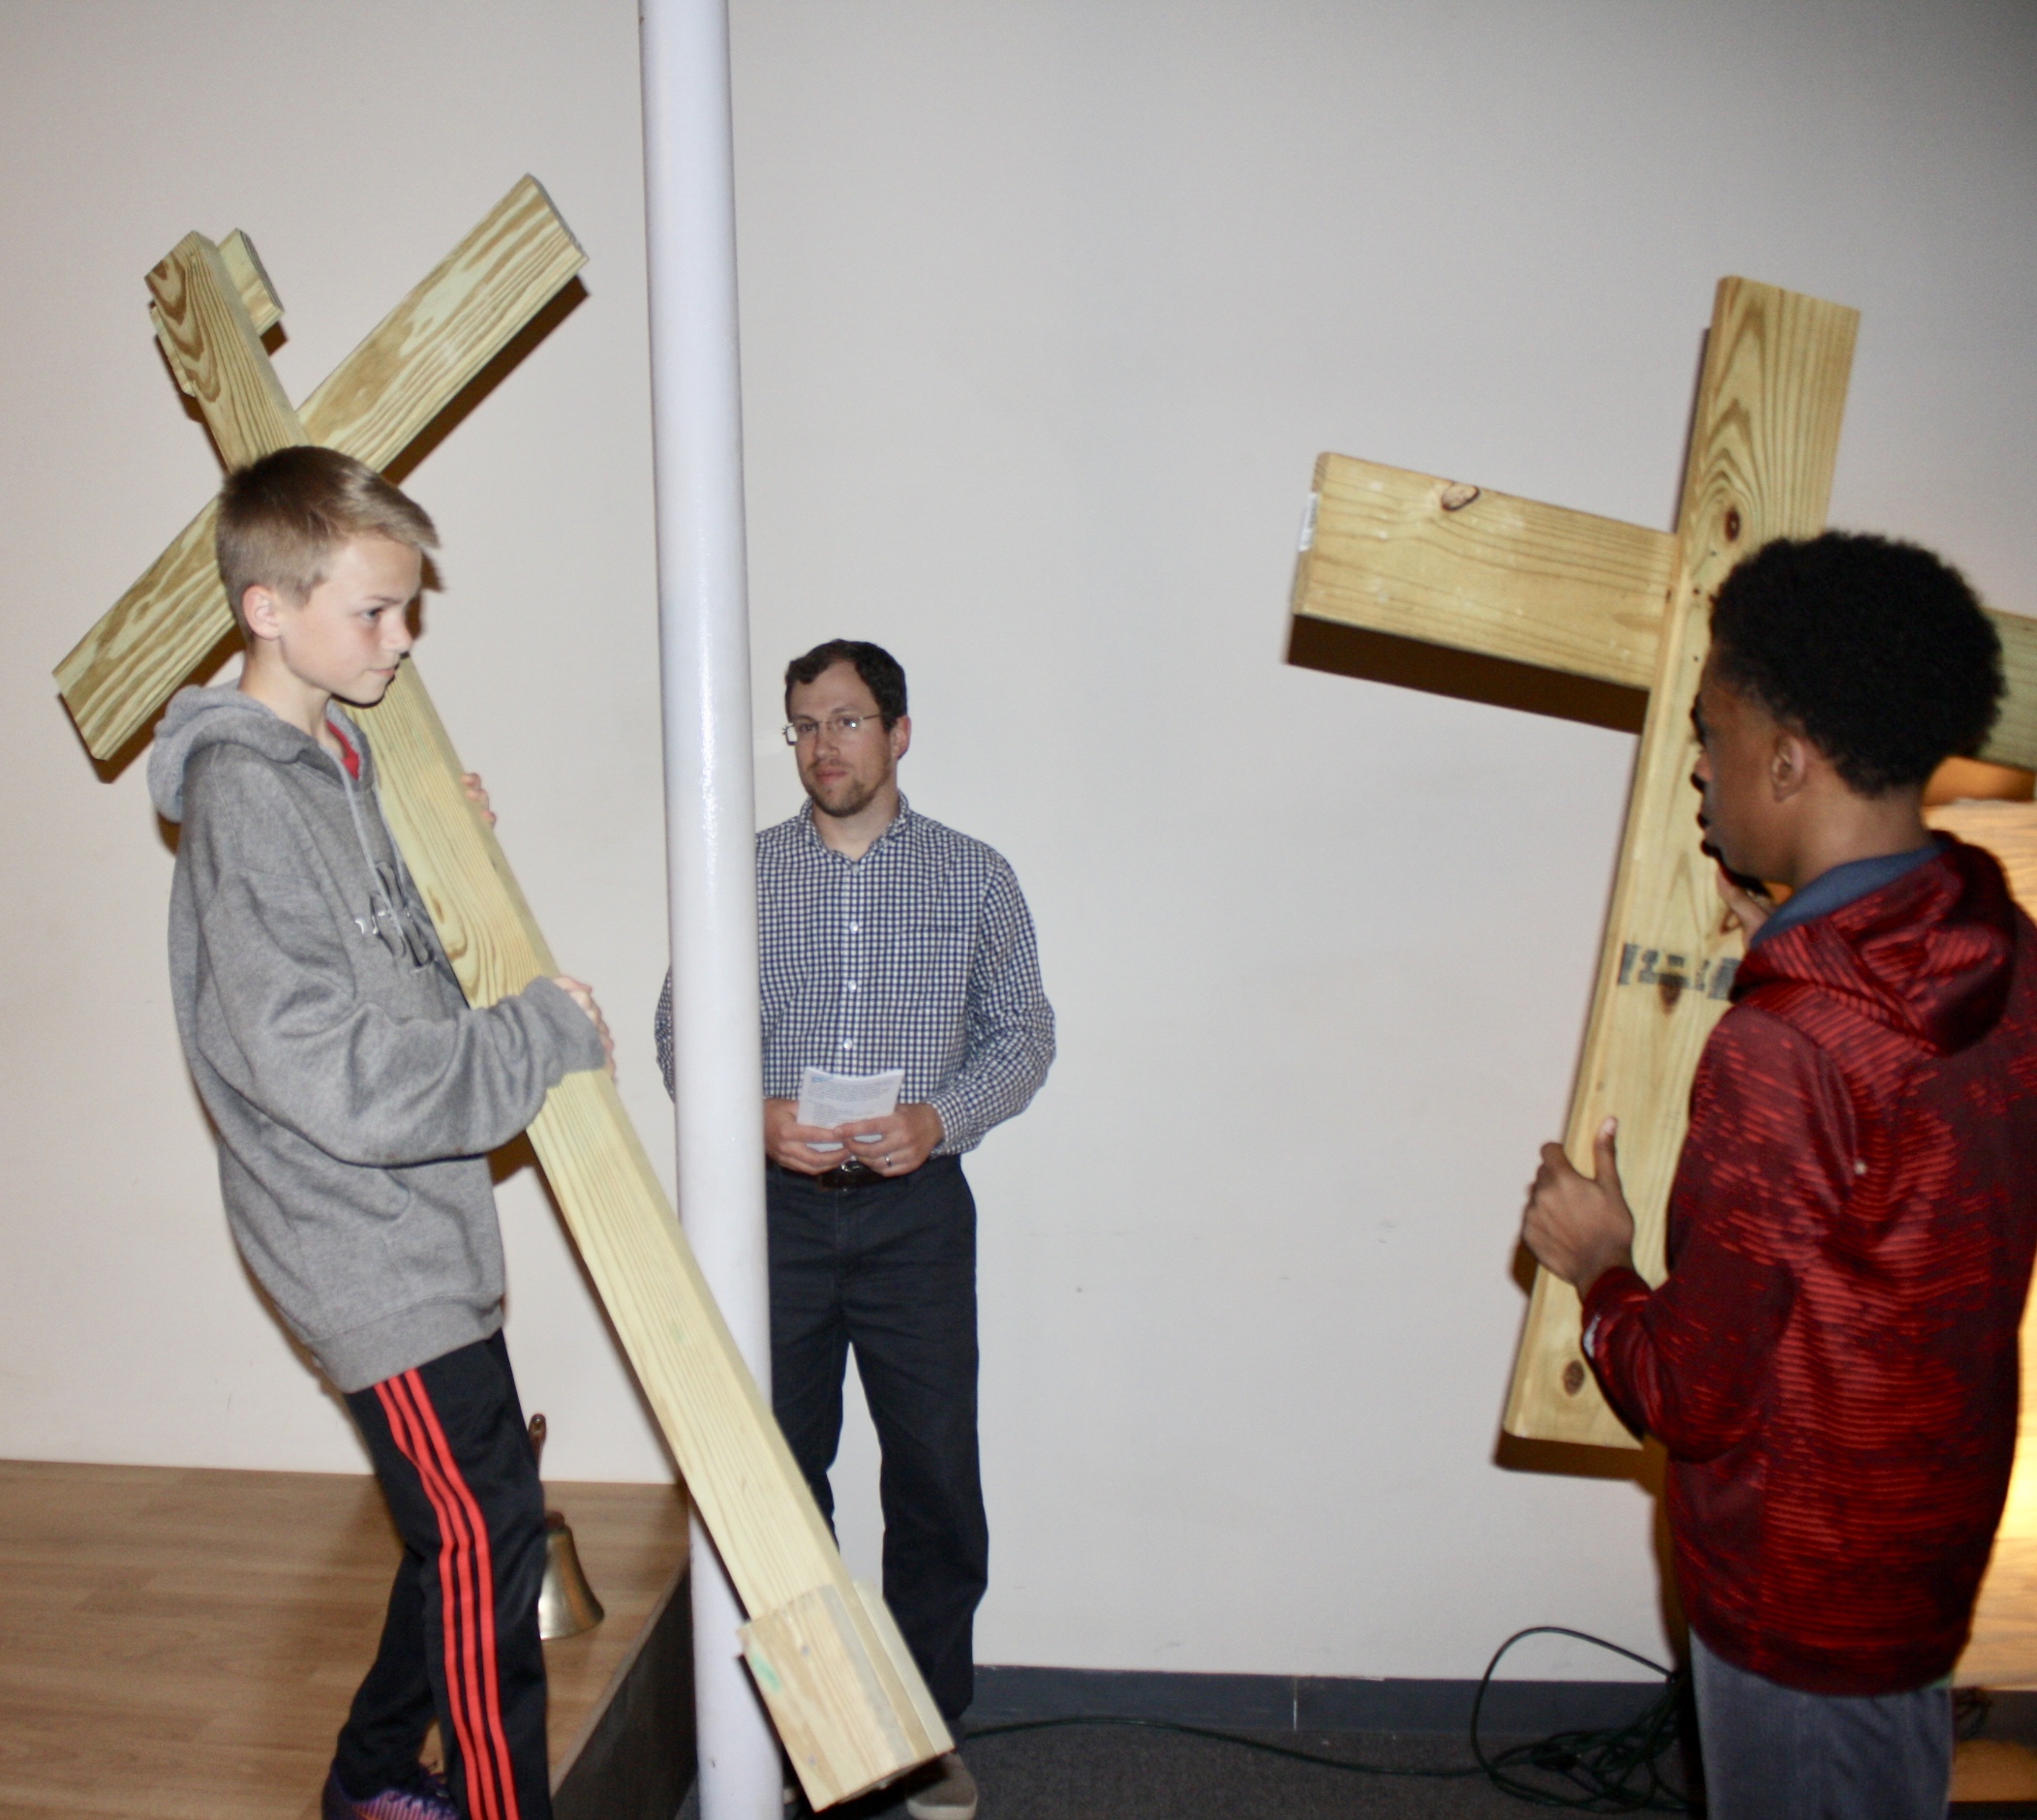   Youth Participation At One of the Ash Wednesday Stations  